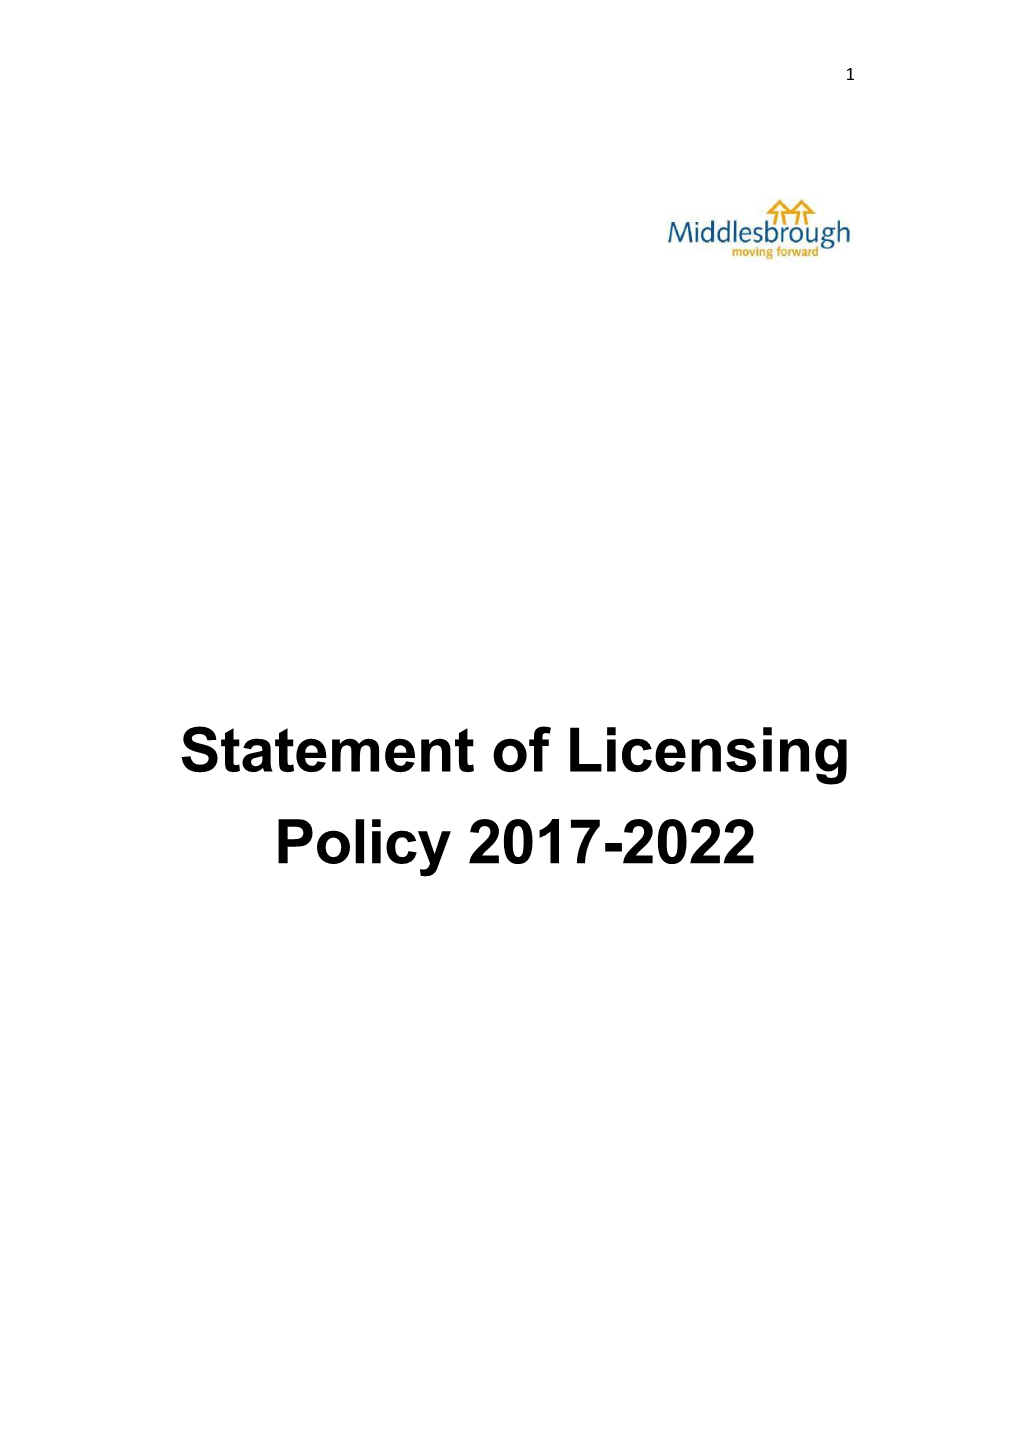 Statement of Licensing Policy 2017-2022